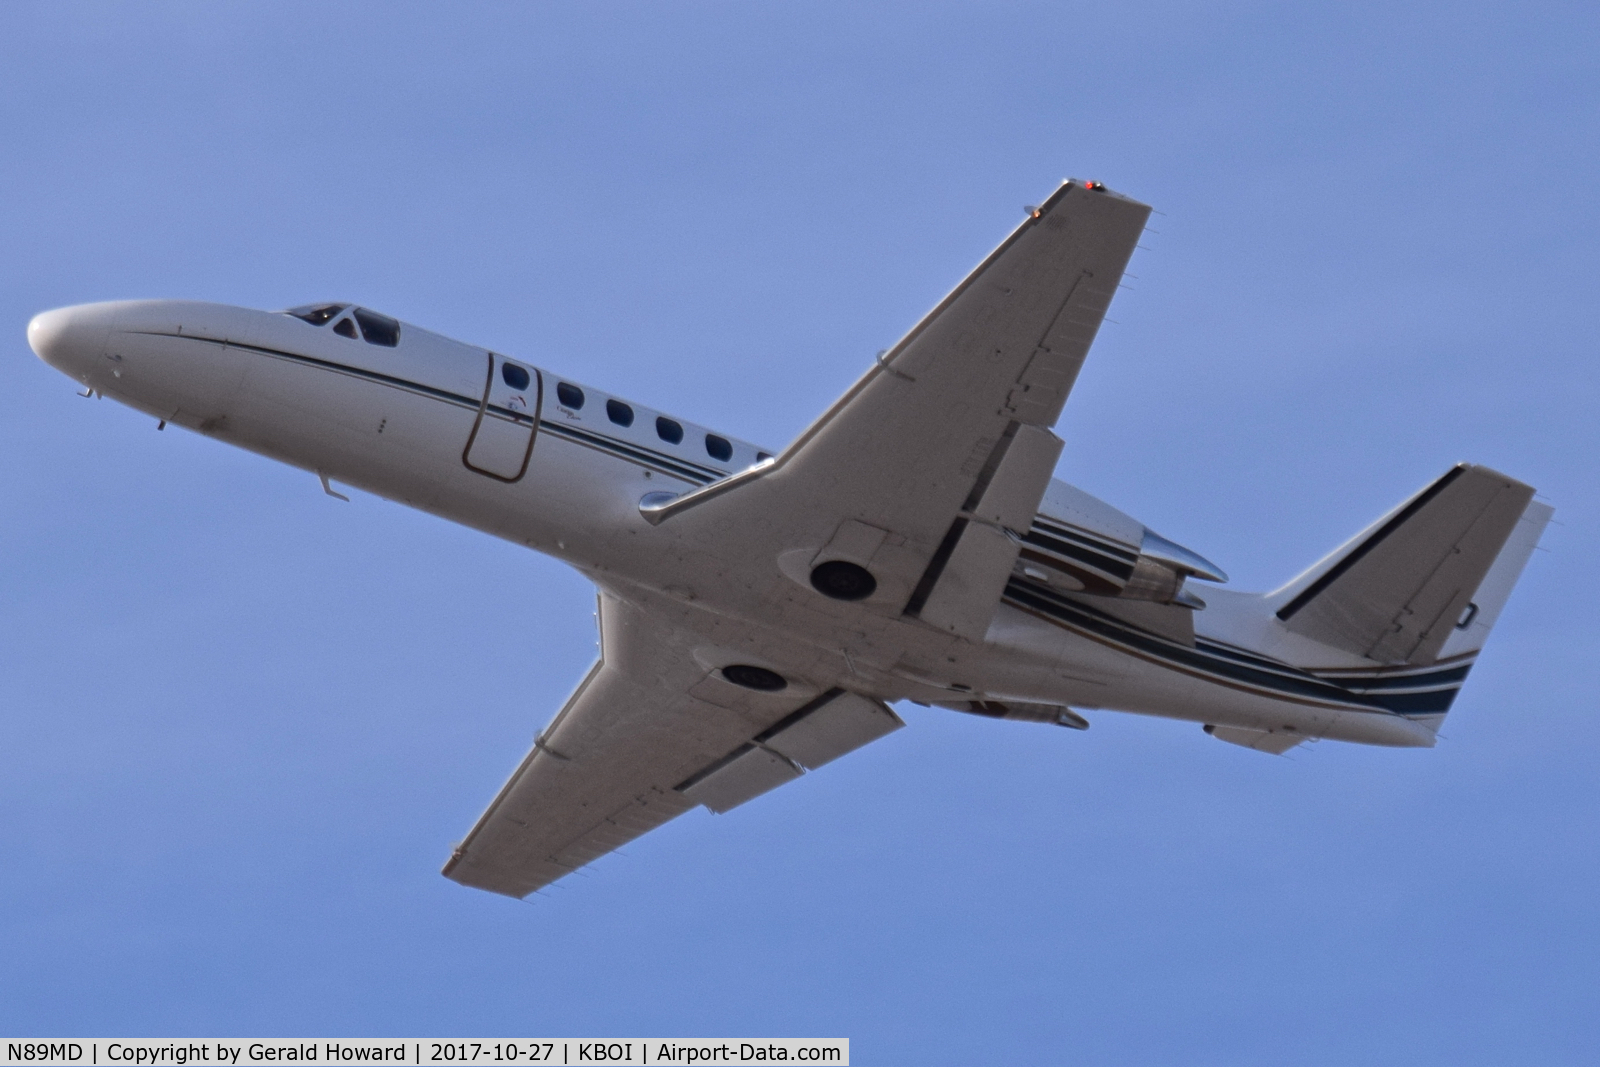 N89MD, 2002 Cessna 560 C/N 560-0612, Climb out from RWY 10L.